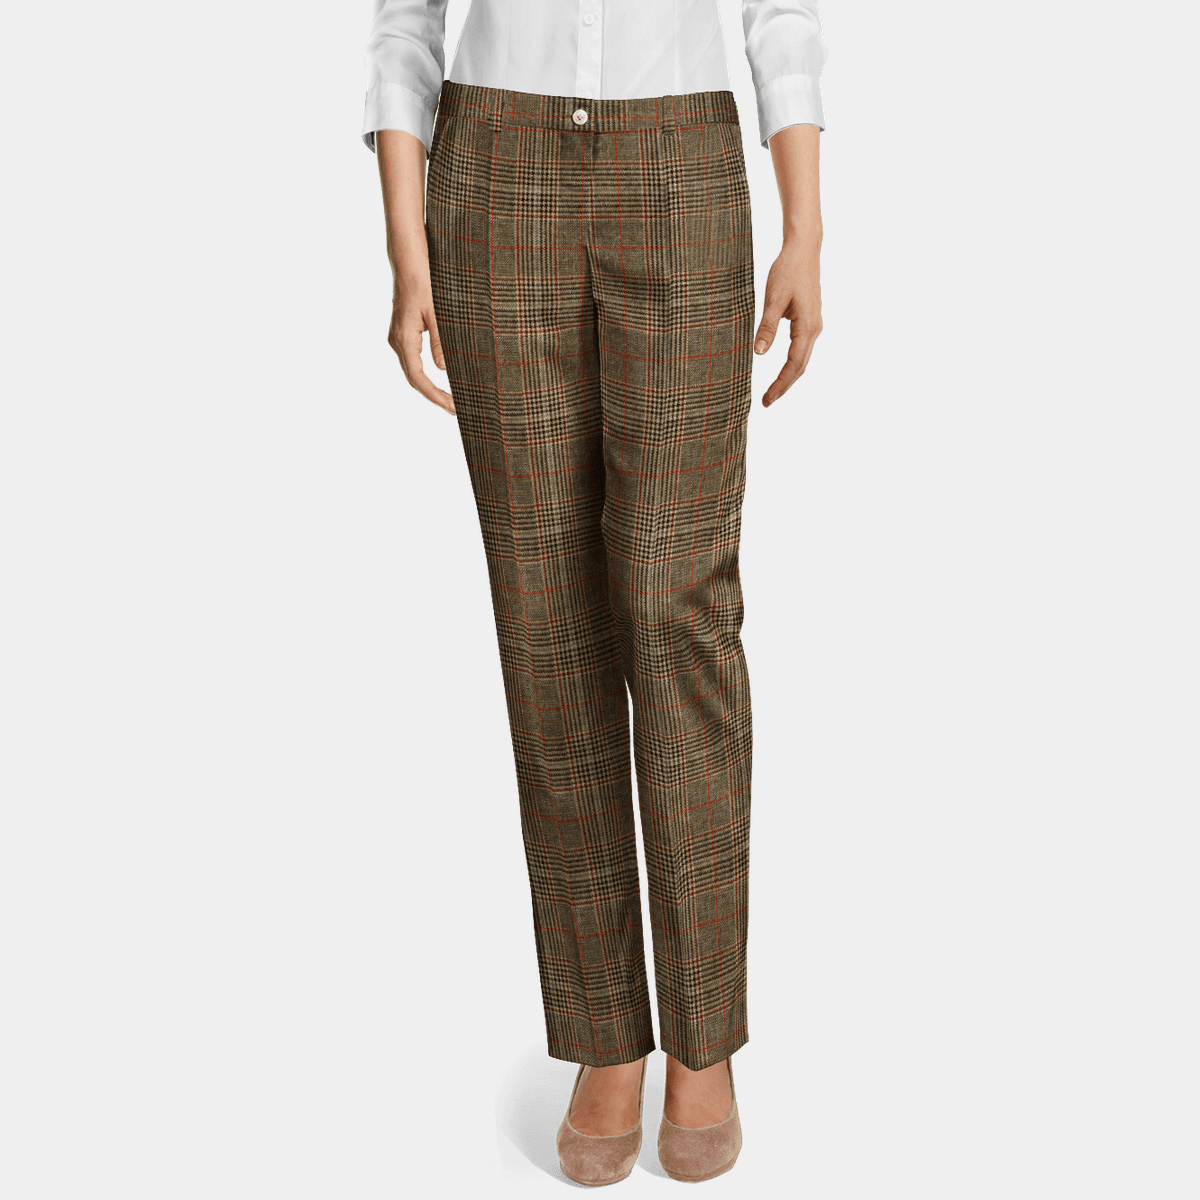 Marks and Spencer M&S Per Una Brown Pinstripe Capri Pants / Cropped Trousers  Size 8 10 12 14